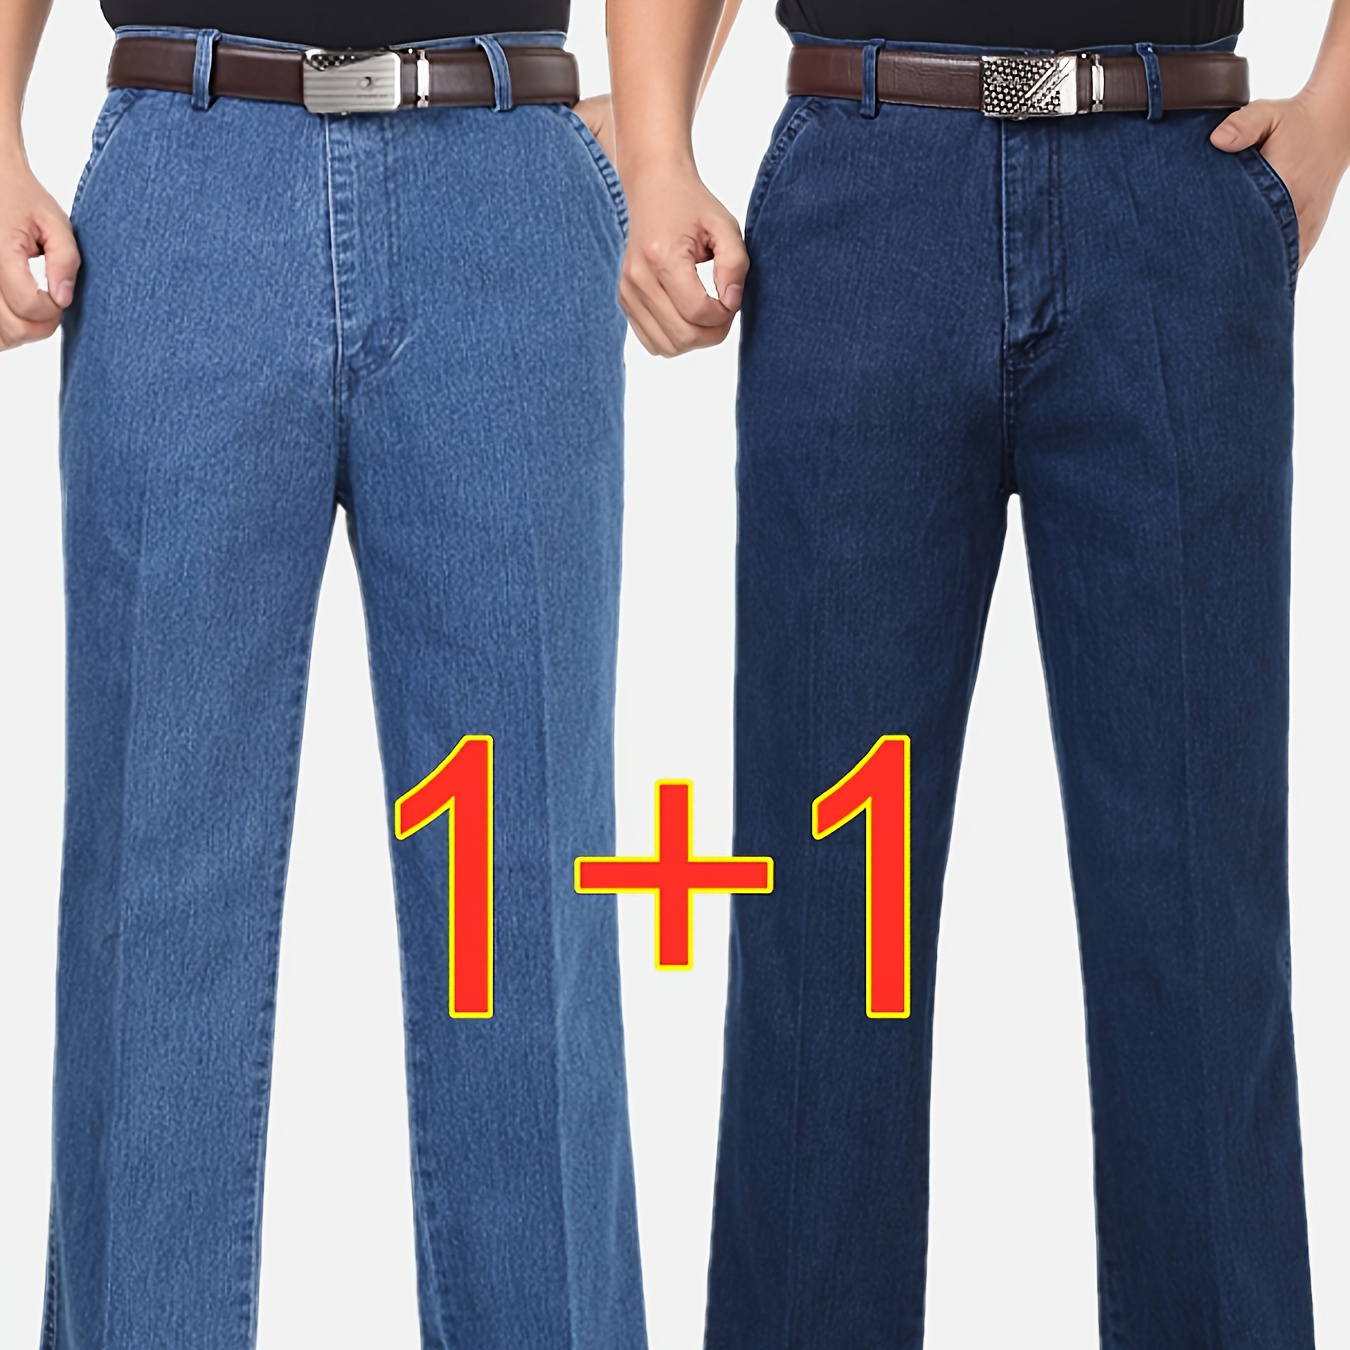 

2 Pcs Men's Loose Solid Denim Barrel Pants With Pockets, Causal Cotton Blend Jeans For Outdoor Activities